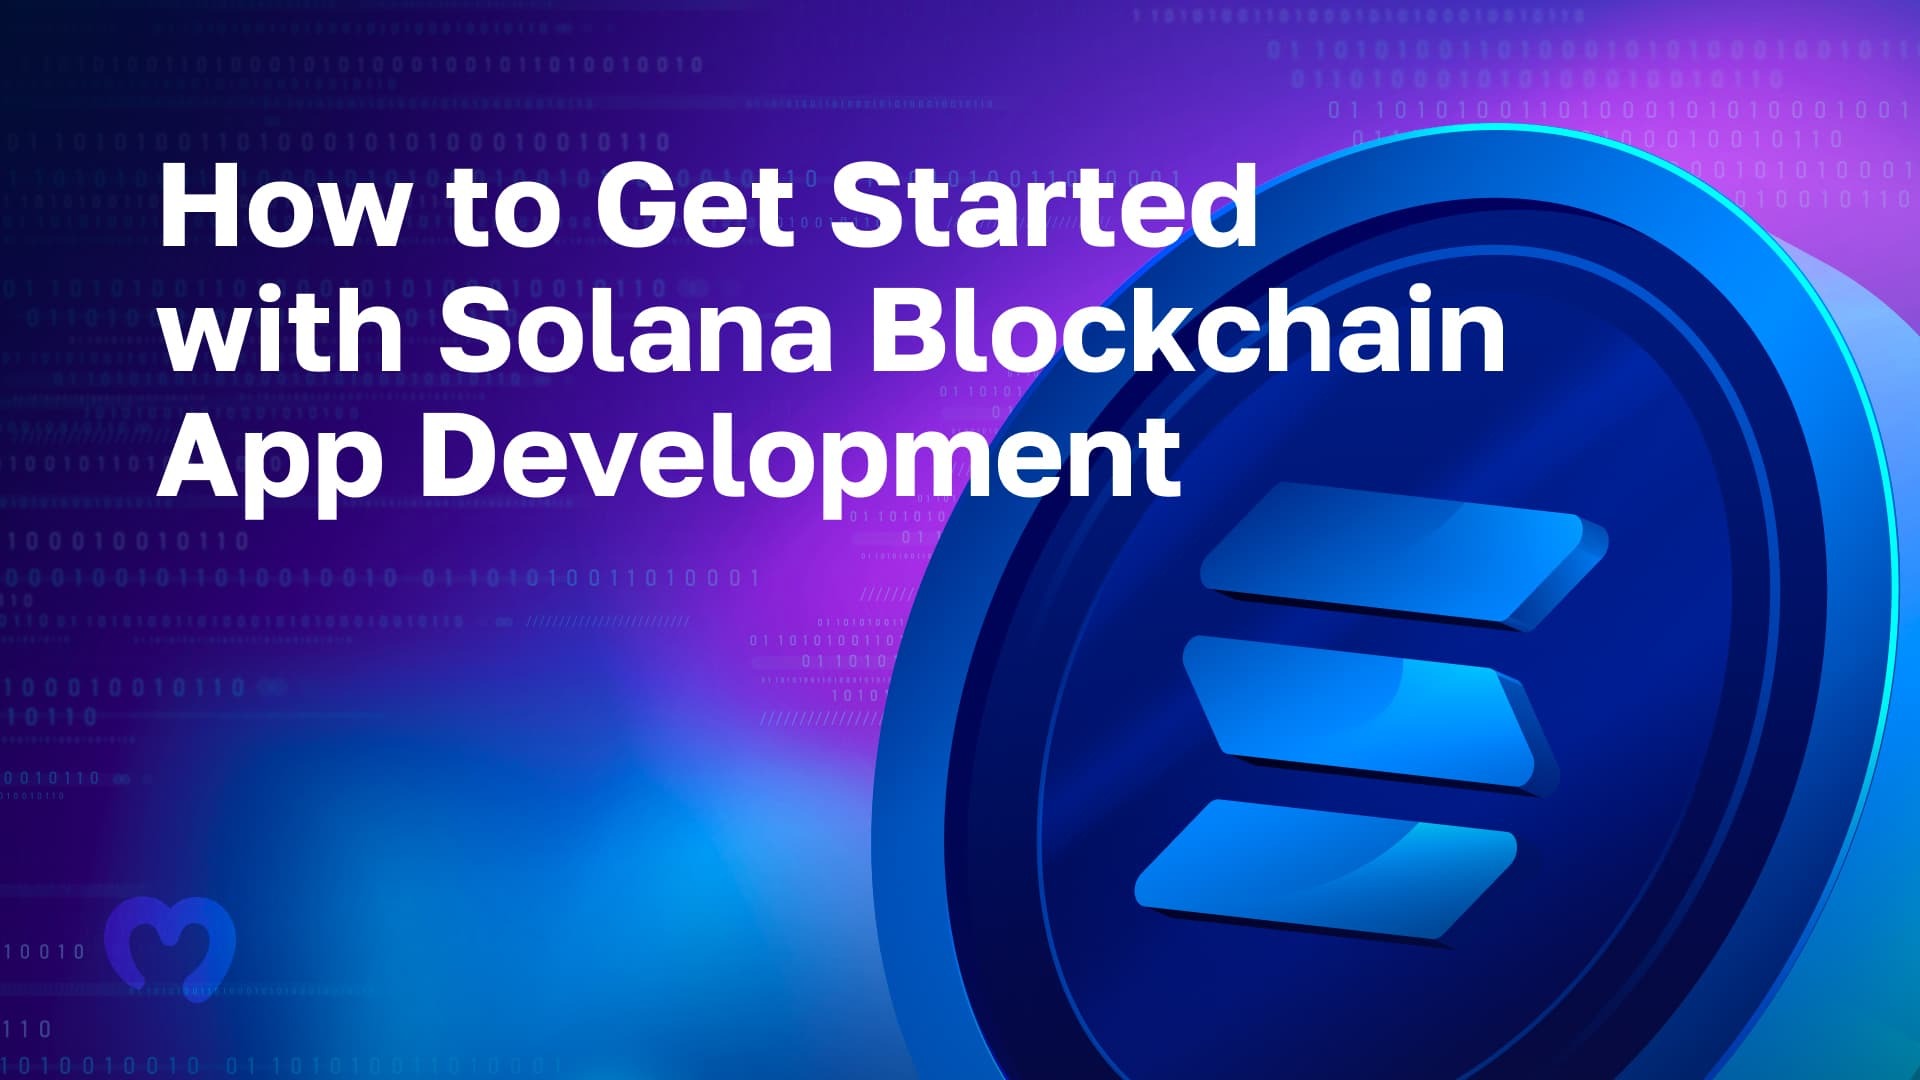 How to Get Started with Solana Blockchain App Development